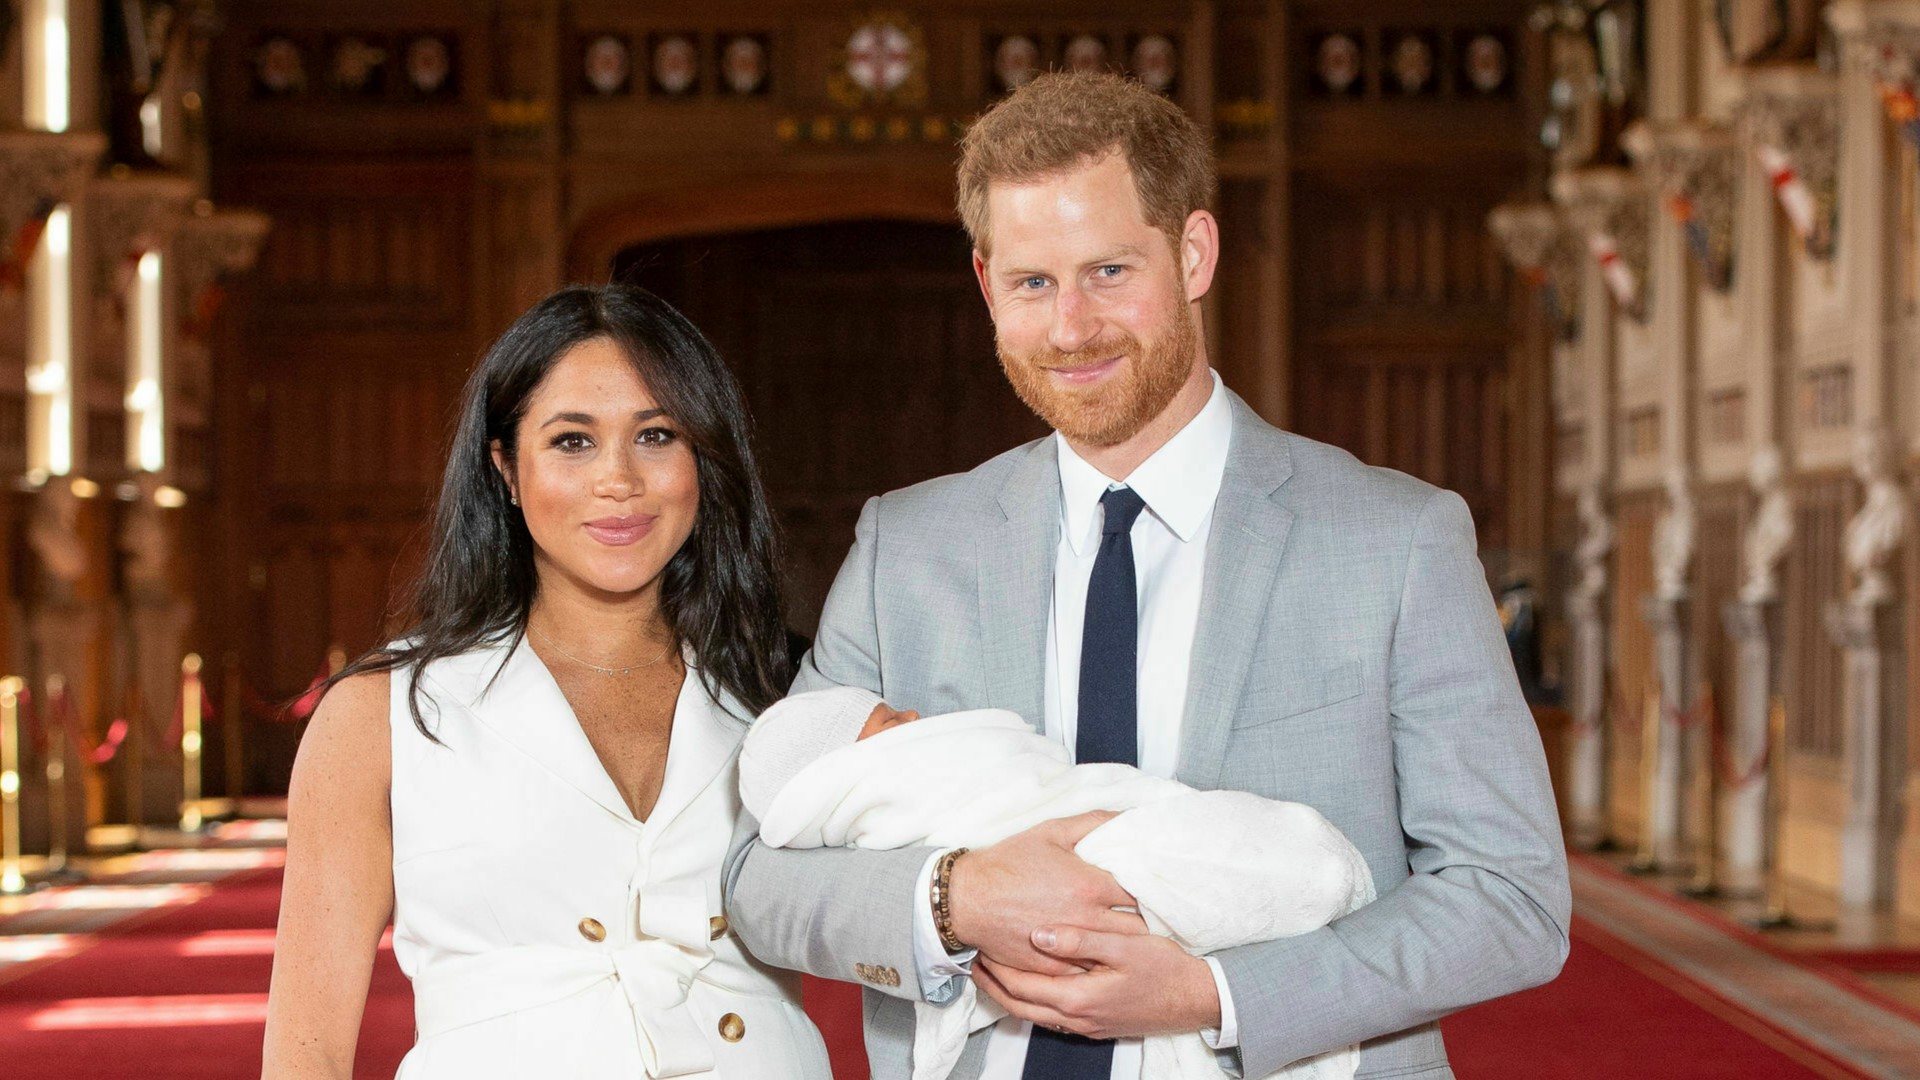 We’re getting our first look at the first child of Prince Harry and Meghan Markle.